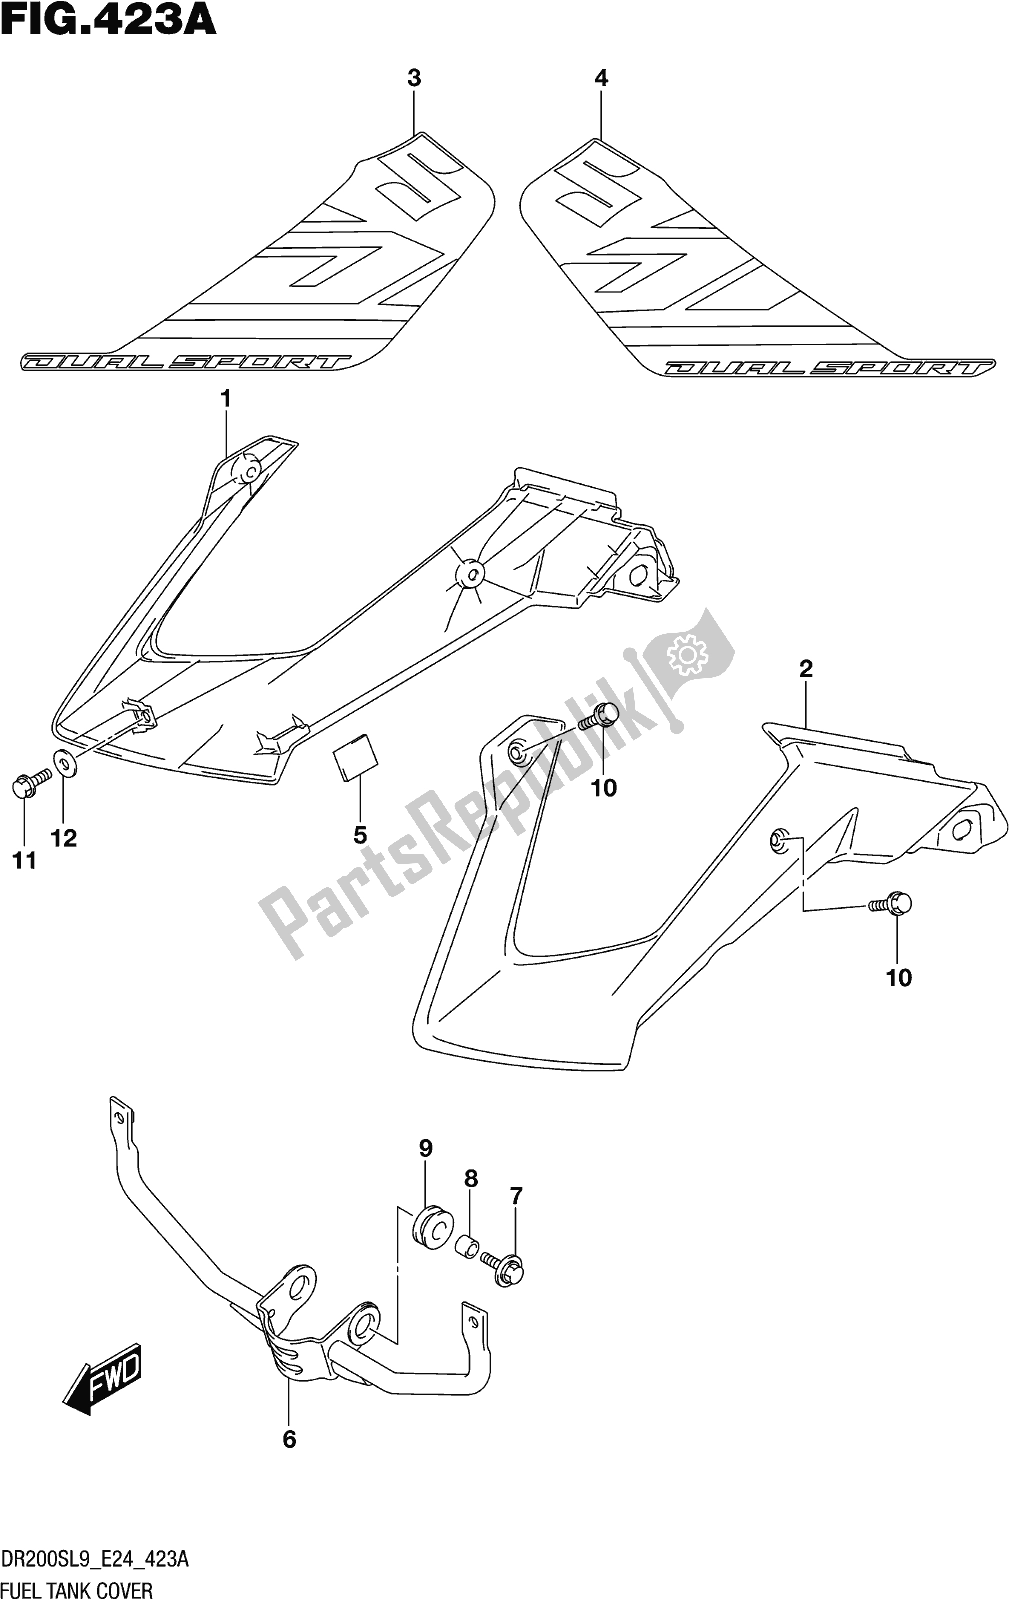 All parts for the Fig. 423a Fuel Tank Cover of the Suzuki DR 200S 2019